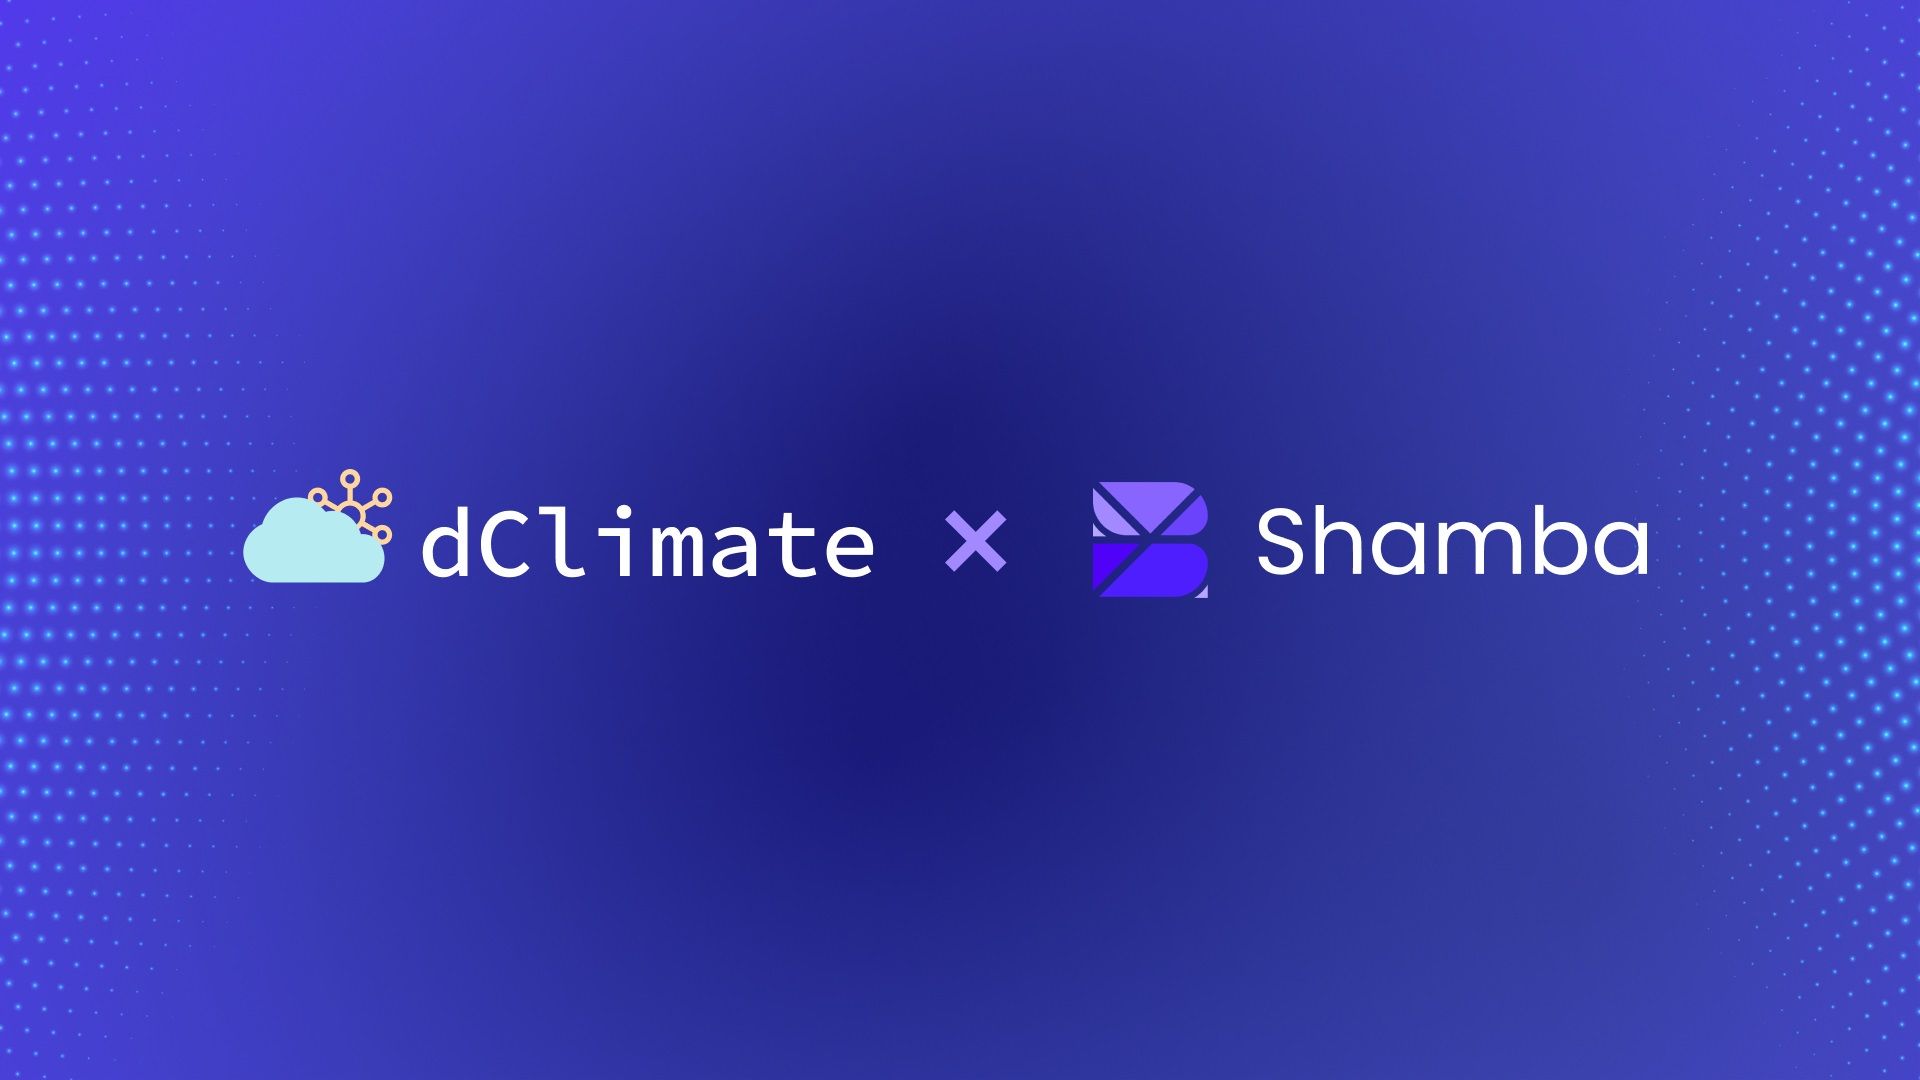 dClimate Partners with Shamba Network to Bring Climate Data for Sub-Saharan Countries Onto its Data Marketplace